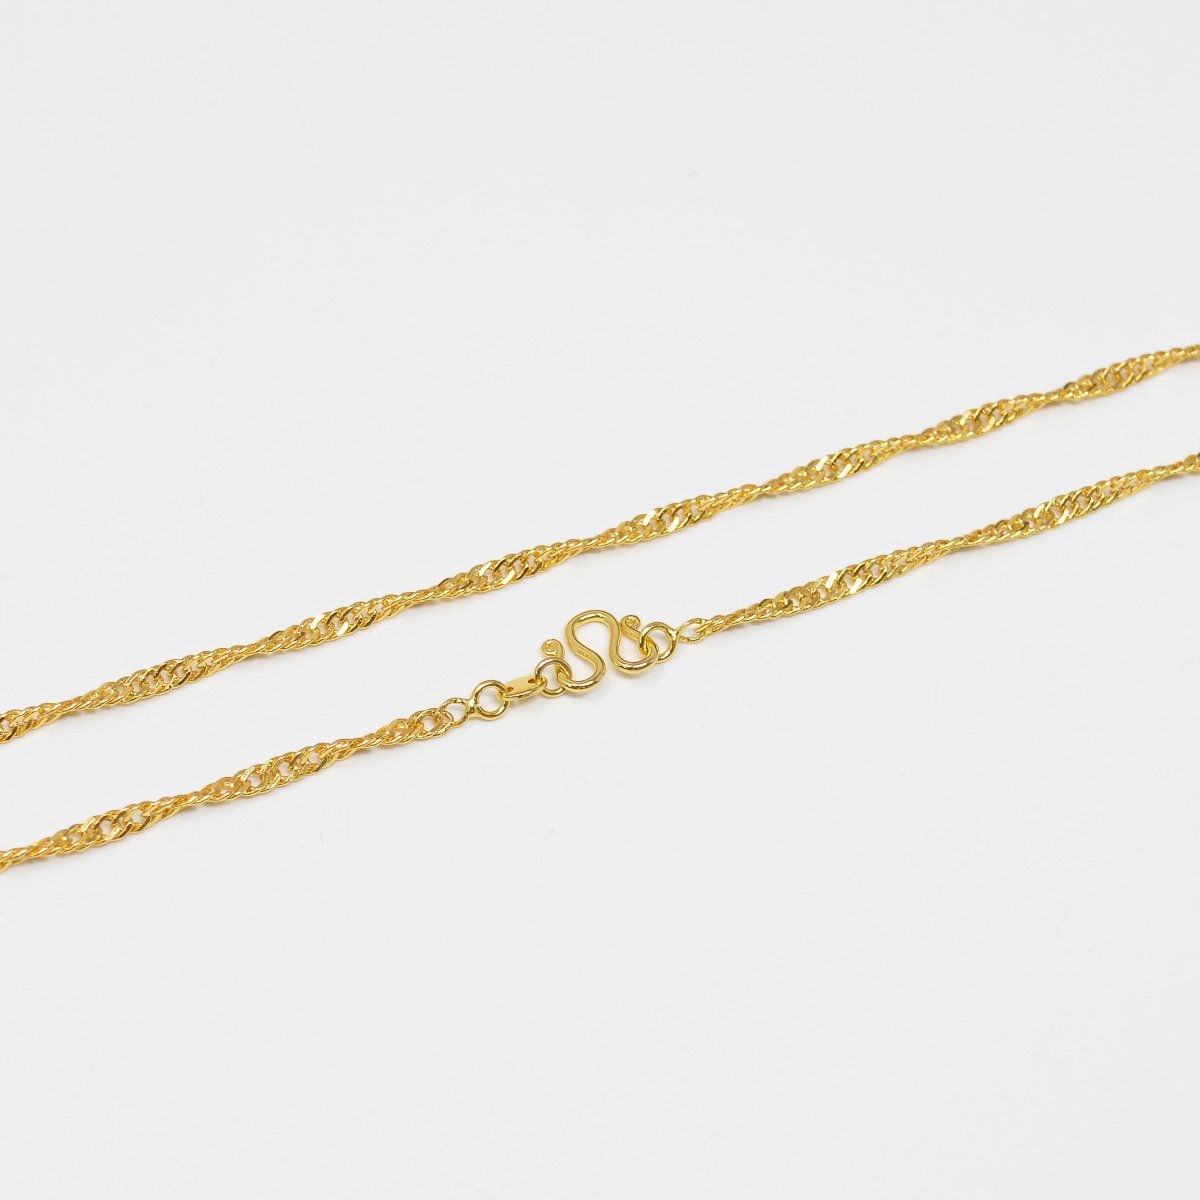 24K Gold Filled Singapore Chain Necklace, 2.5mm 20 inches Long Yellow Gold Singapore Necklace w/ W Clasps | CN-988 Clearance Pricing - DLUXCA